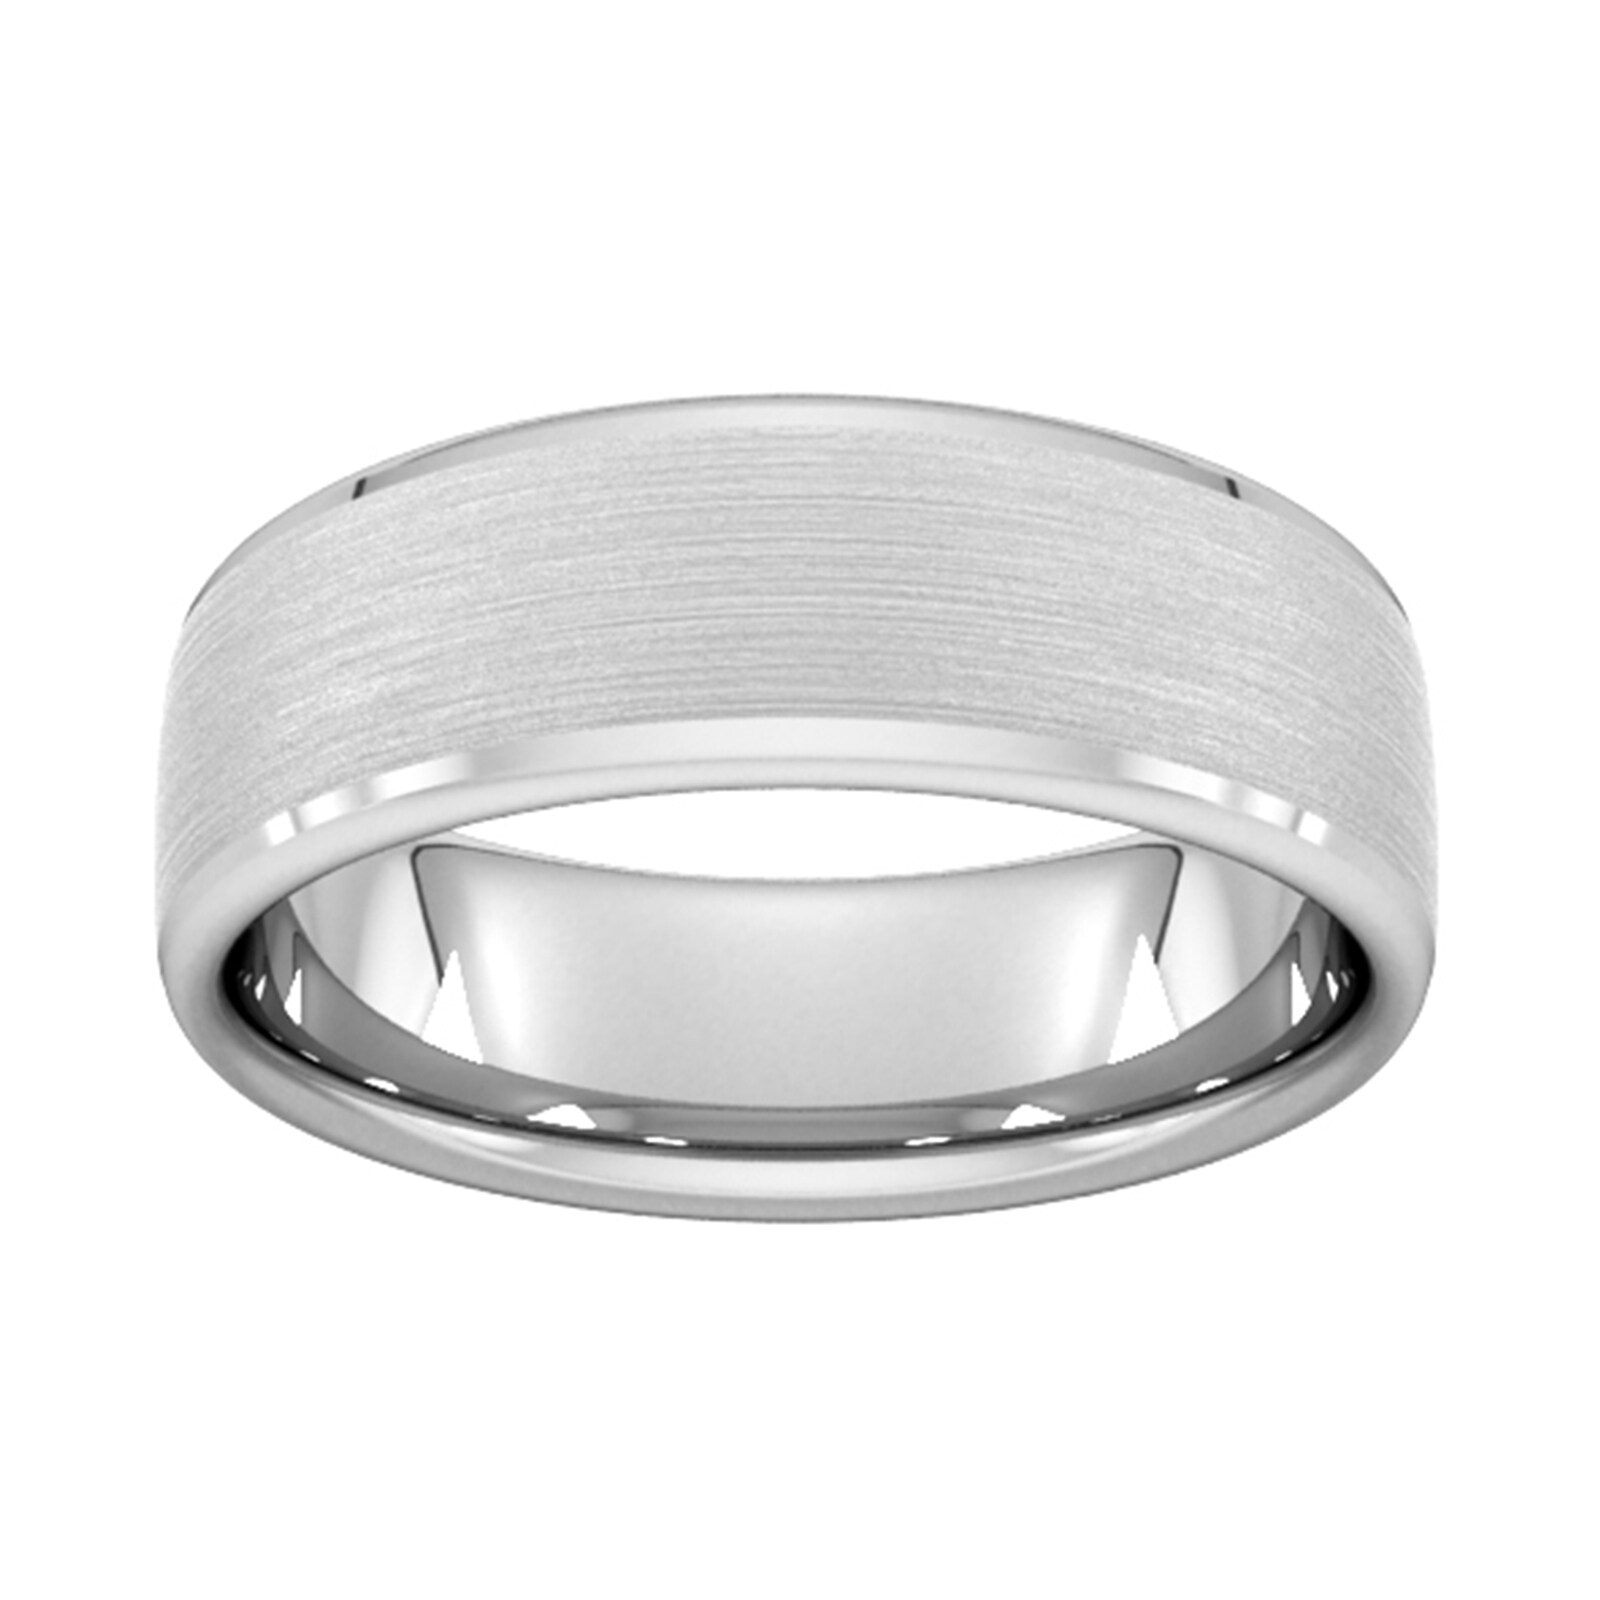 7mm Slight Court Standard Polished Chamfered Edges With Matt Centre Wedding Ring In 18 Carat White Gold - Ring Size U